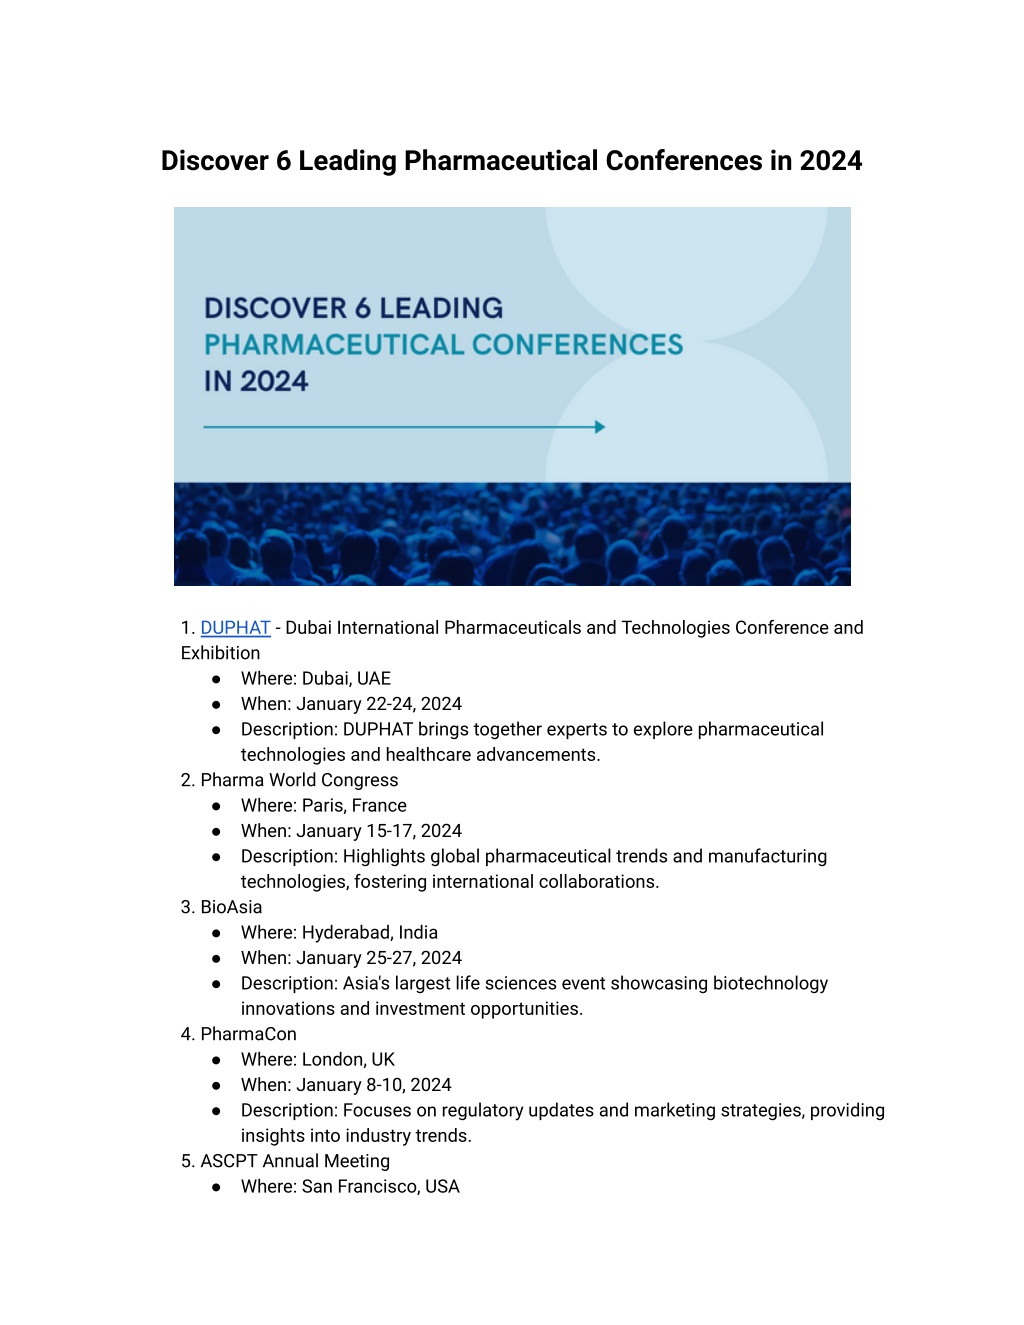 PPT Discover 6 Leading Pharmaceutical Conferences in 2024 PowerPoint